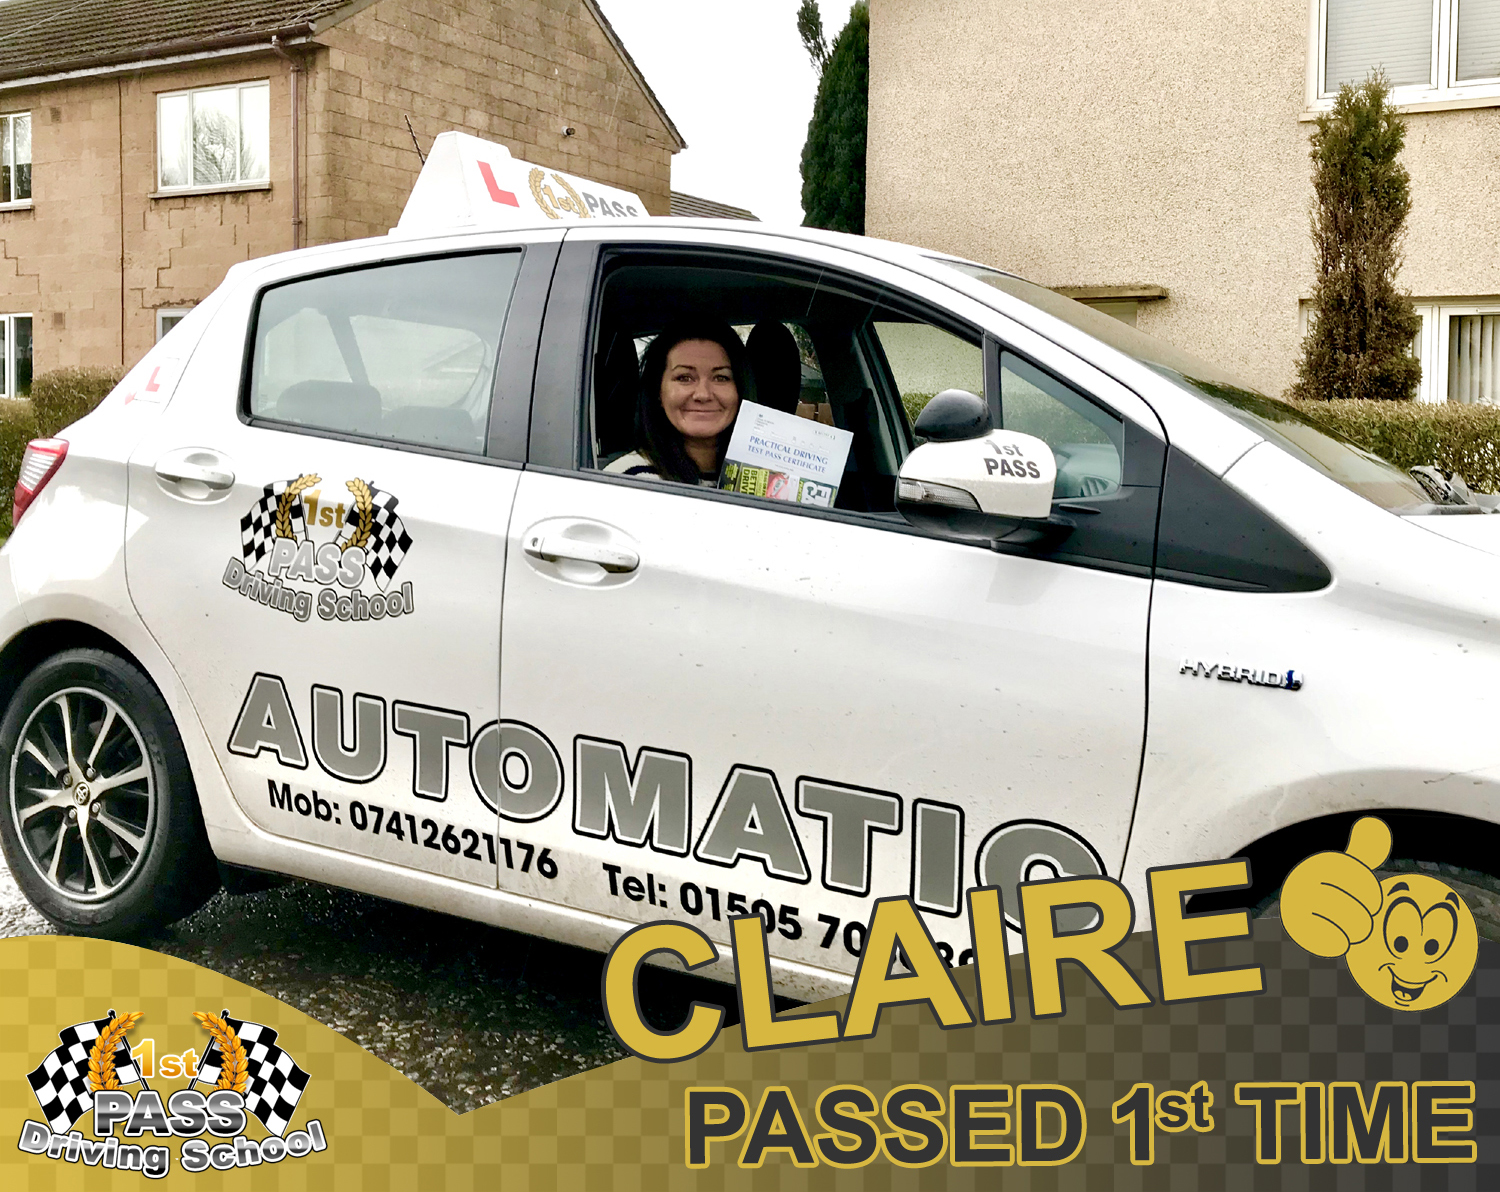 Claire - passed 1st attempt at Paisley Test Centre